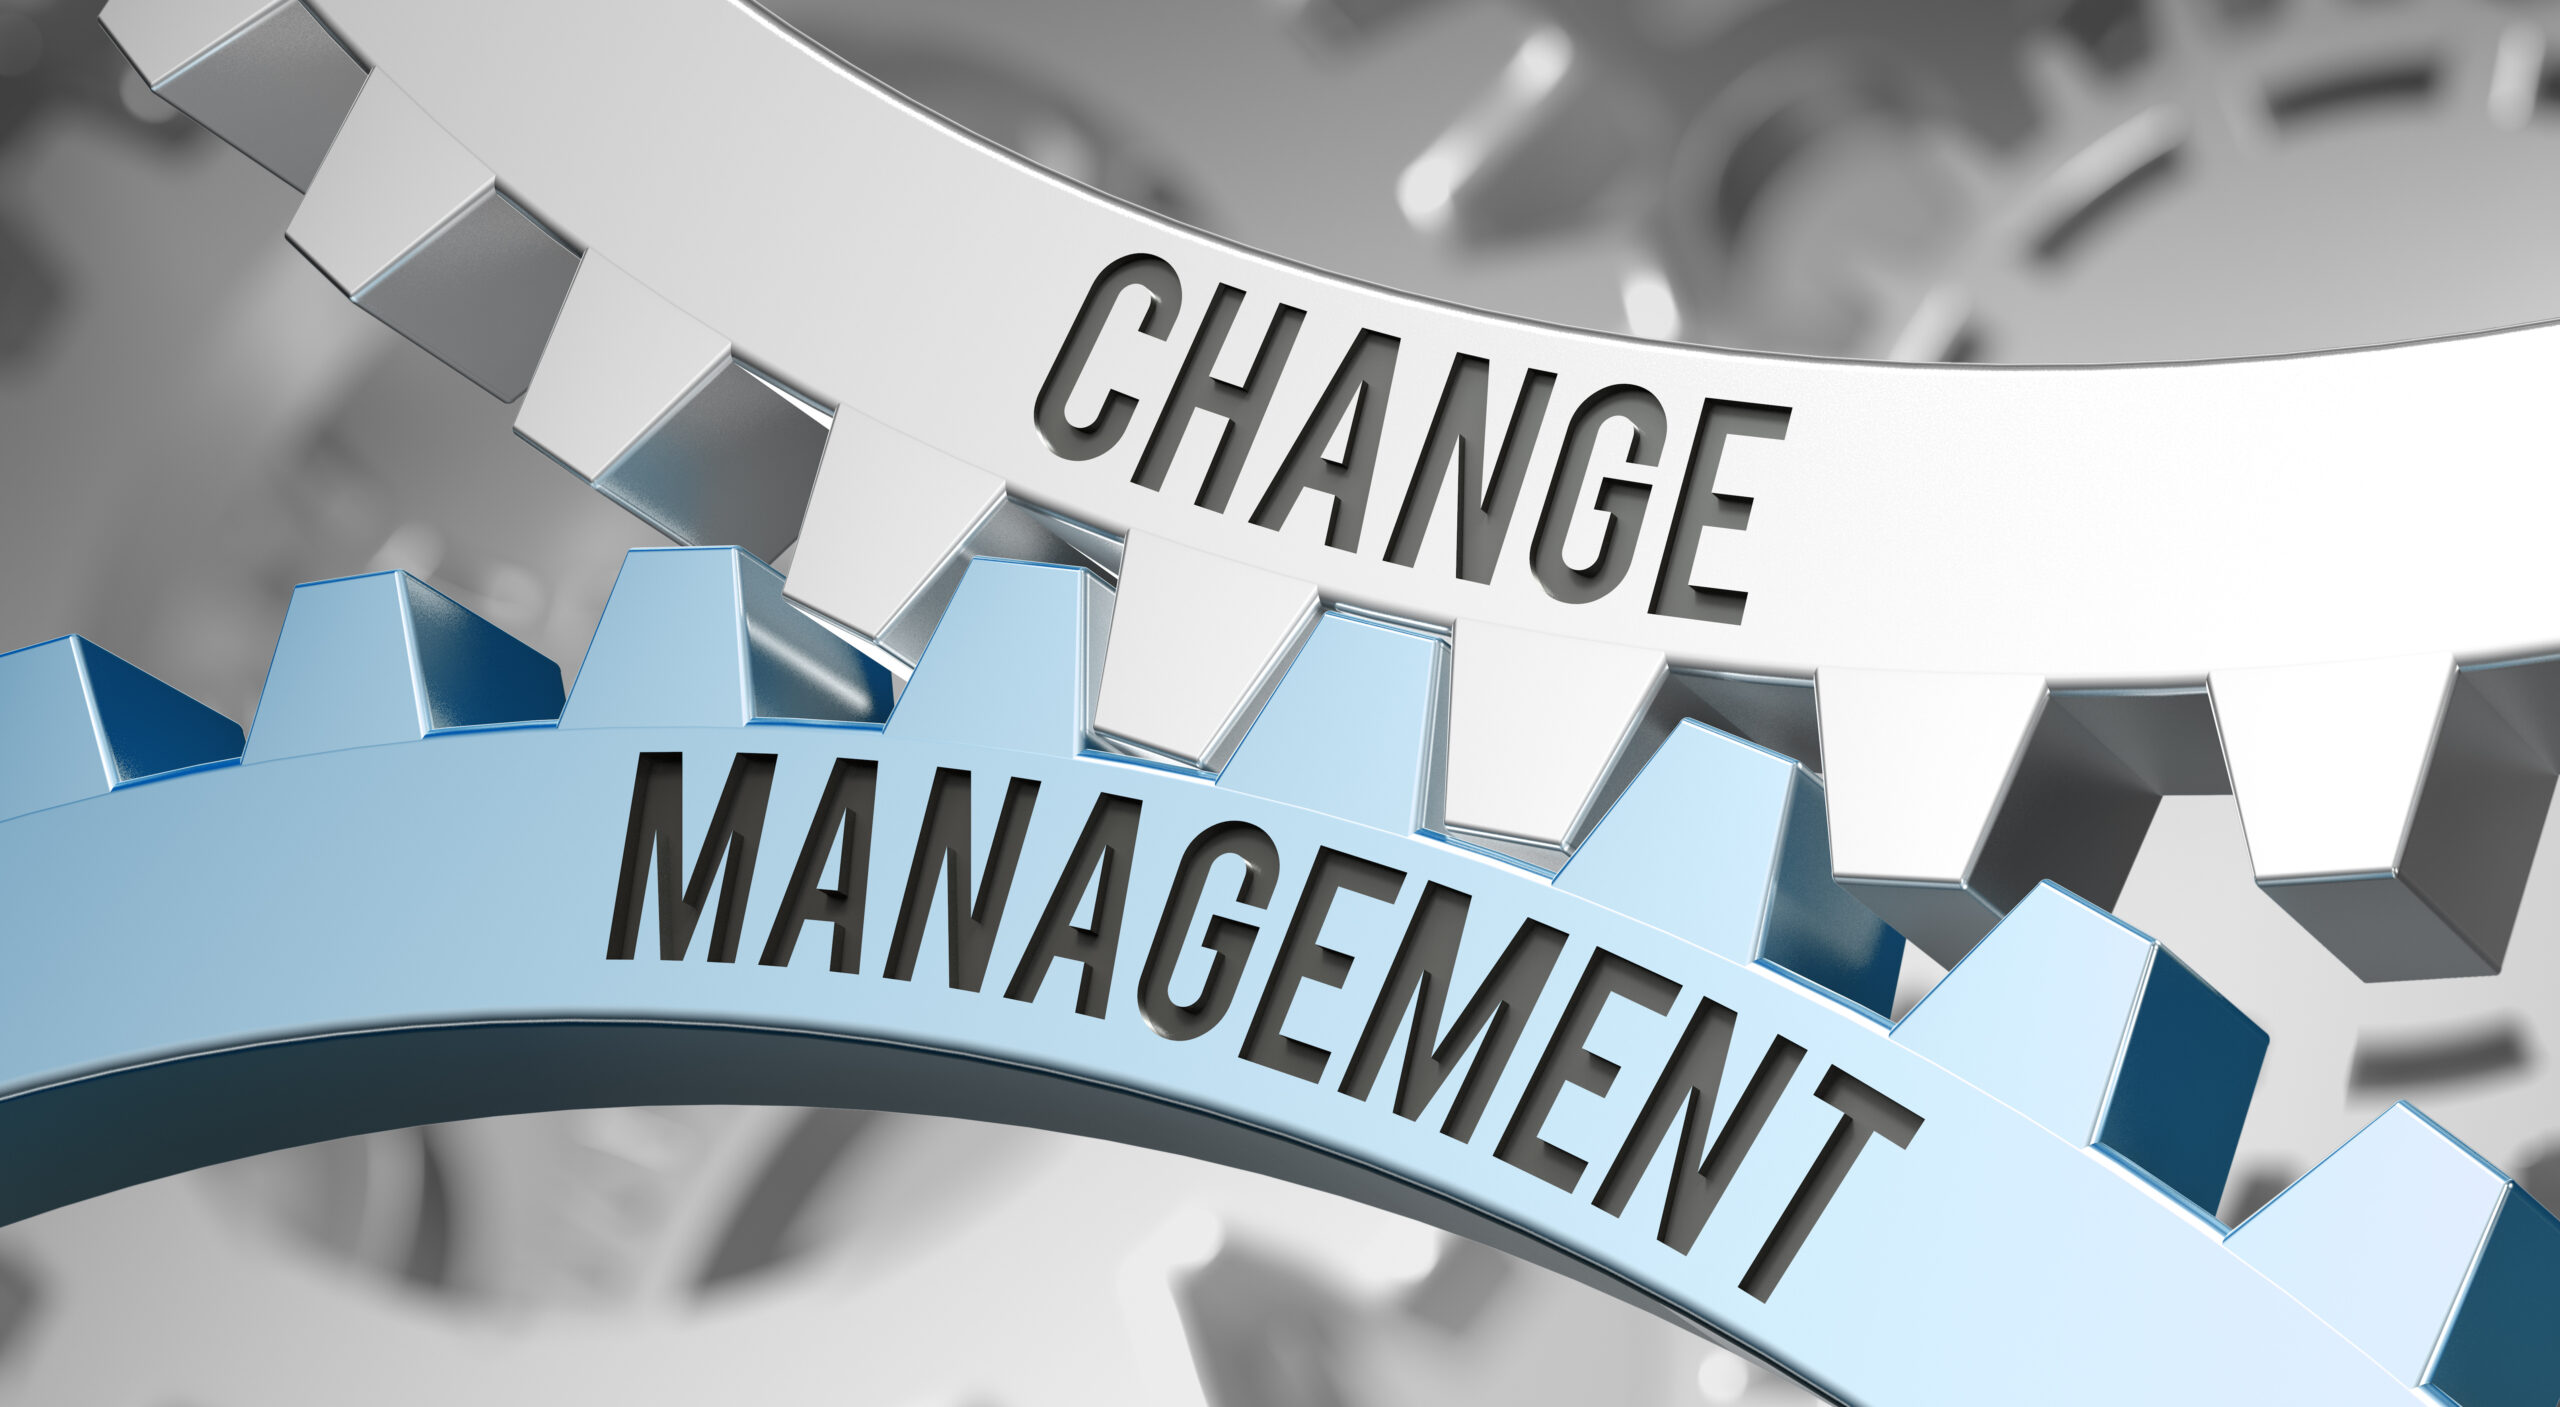 Change-Management-Cogs-Gears-And-Wheel